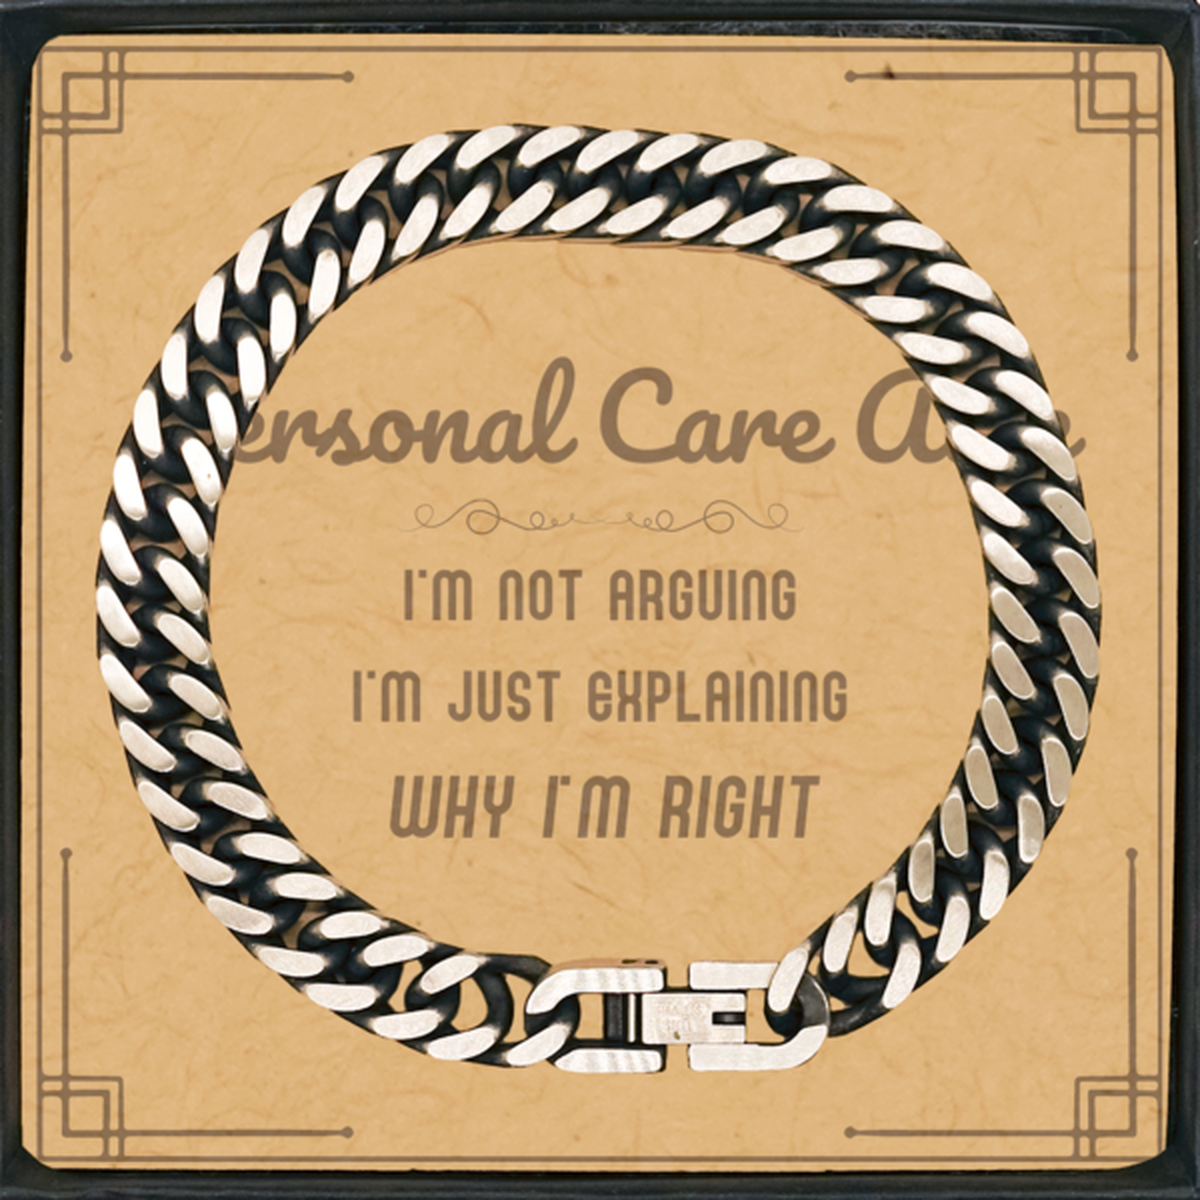 Personal Care Aide I'm not Arguing. I'm Just Explaining Why I'm RIGHT Cuban Link Chain Bracelet, Funny Saying Quote Personal Care Aide Gifts For Personal Care Aide Message Card Graduation Birthday Christmas Gifts for Men Women Coworker